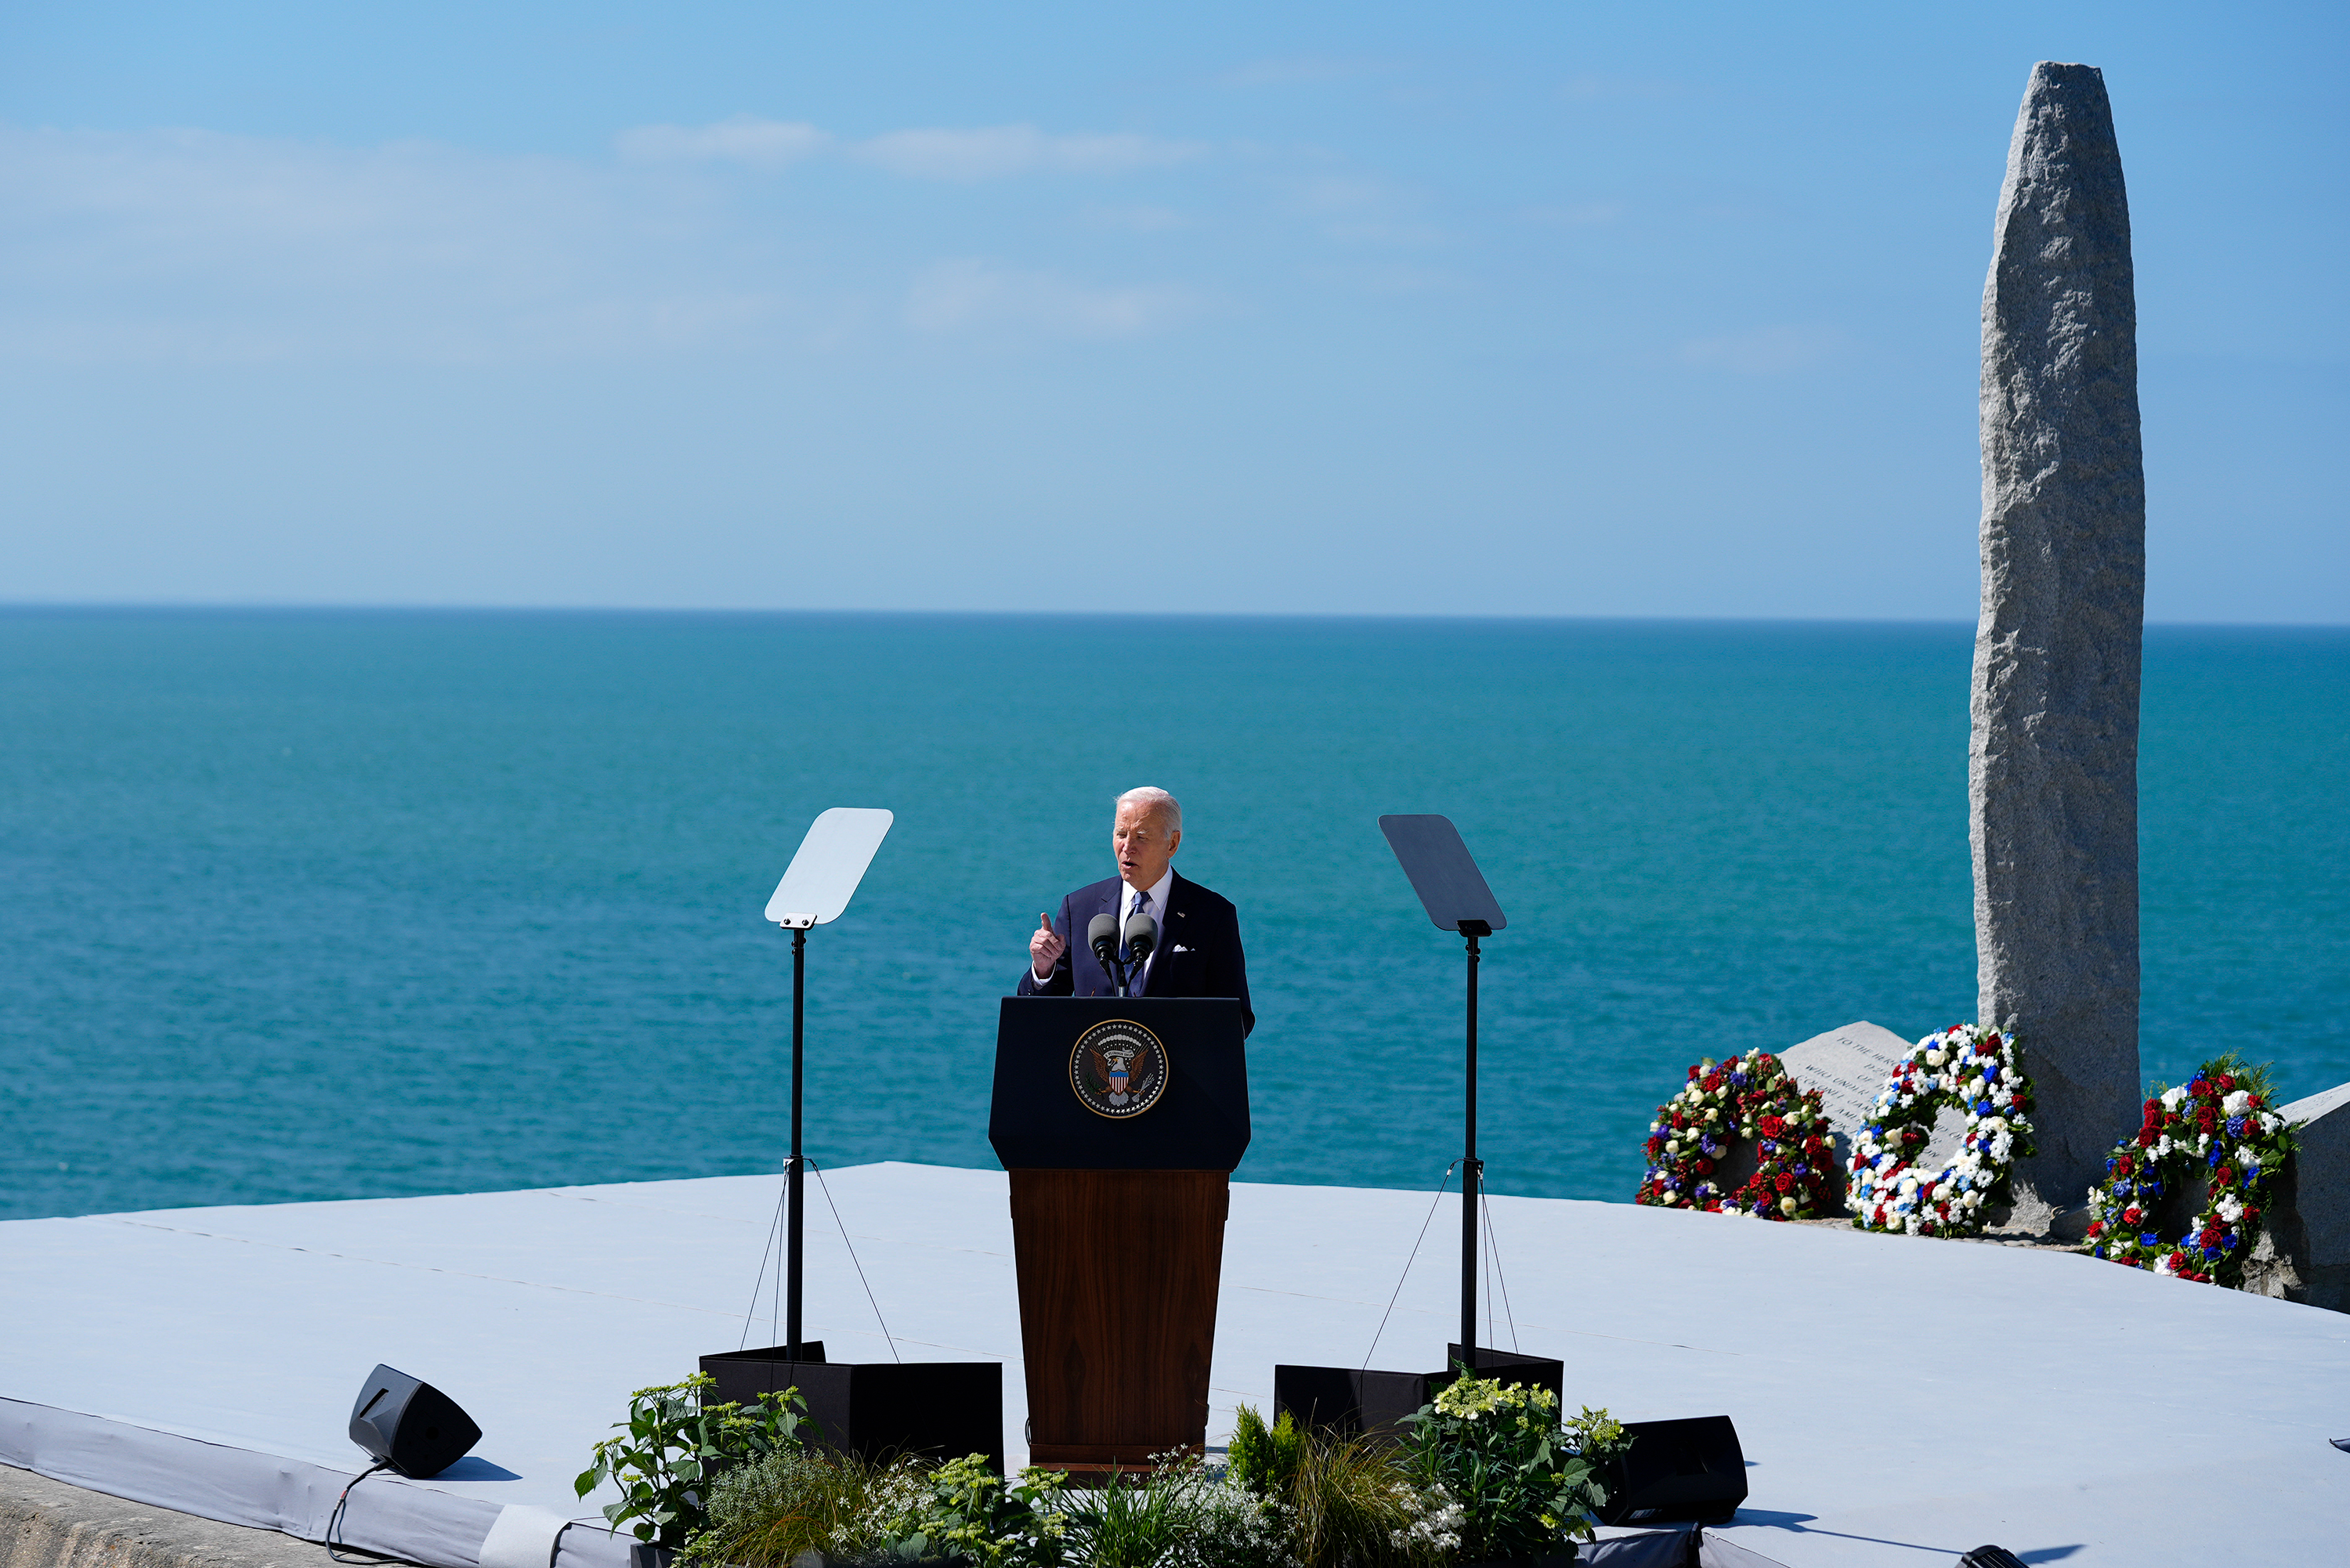 US President Joe Biden delivers a speech at the Pointe du Hoc monument in Normandy, France, on Friday.